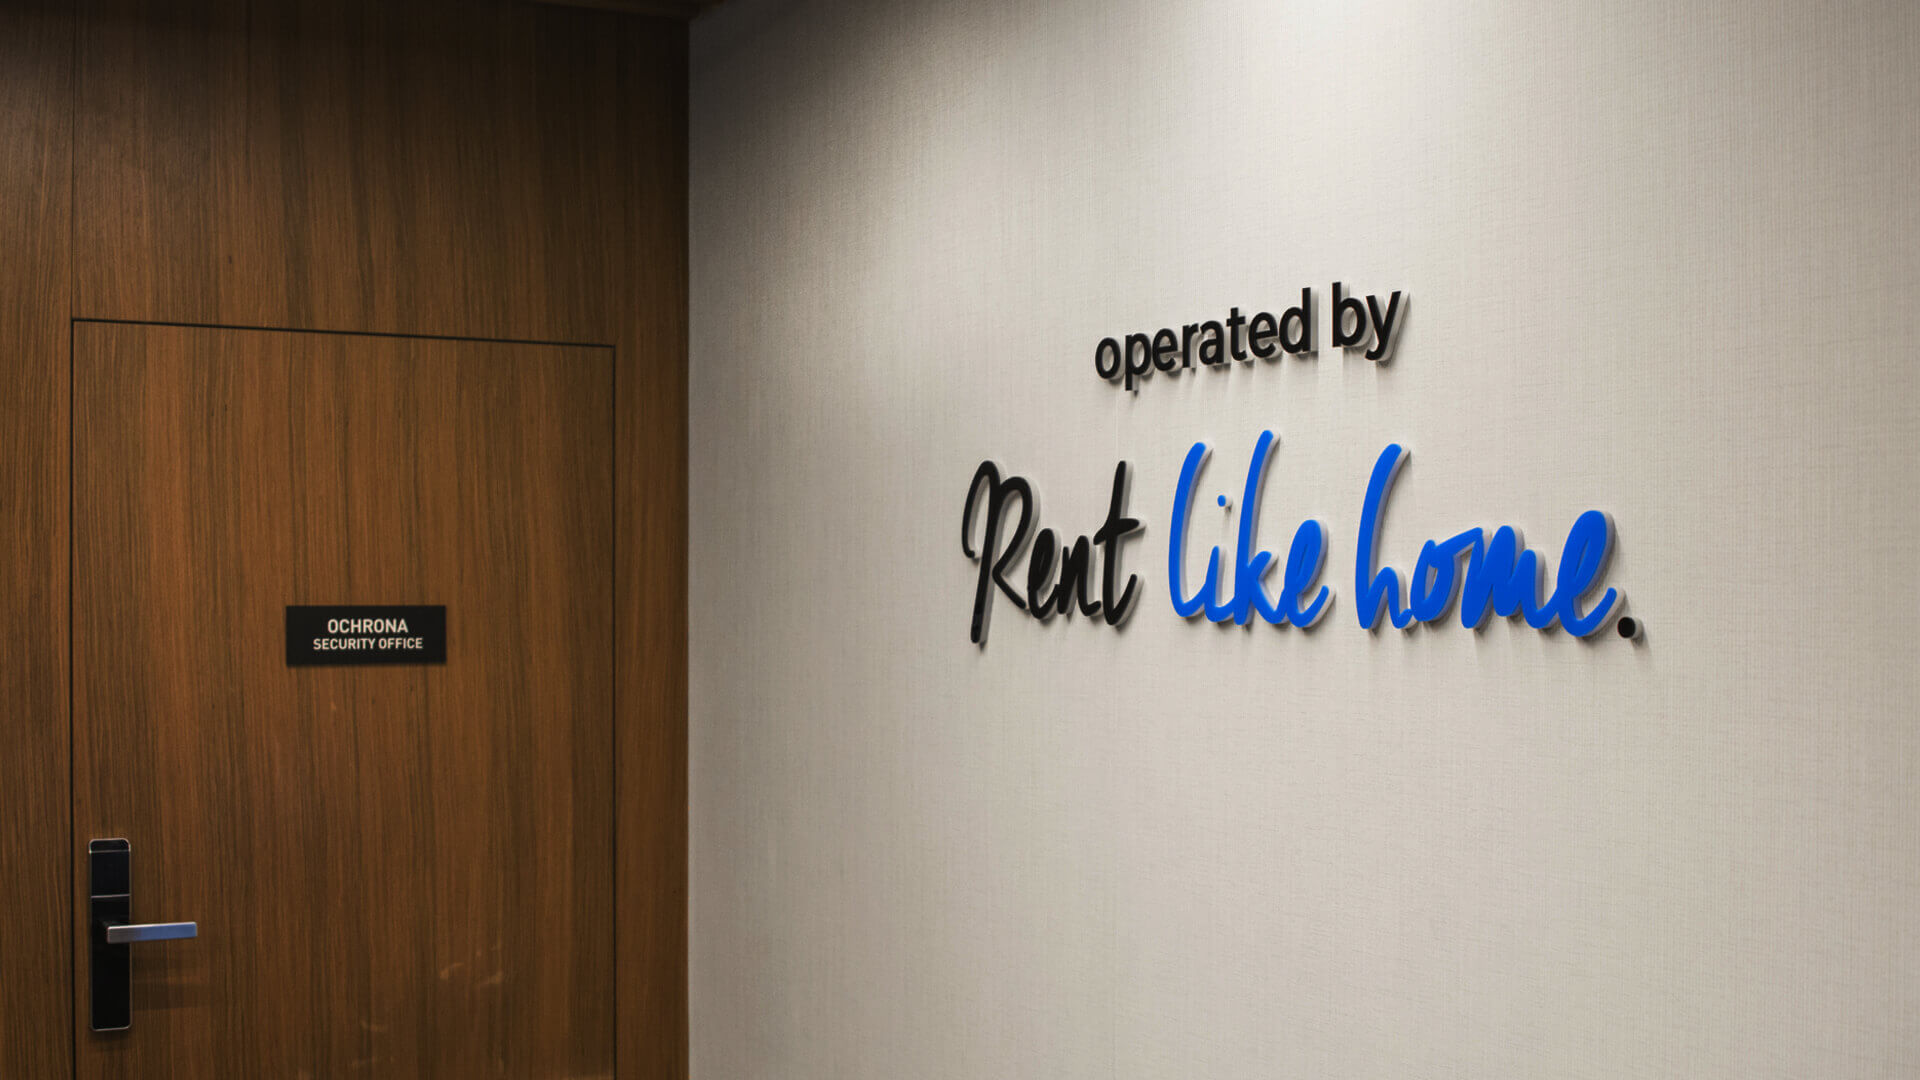 affitto come casa deo Radisson appartamenti - rent-like-home-space-letters-lettering-on-the-wall-behind-reception-in-office-deo-apartments-blue-letters-lettering-on-the-wall-lettering-on-the-wall-gdansk- (8) 